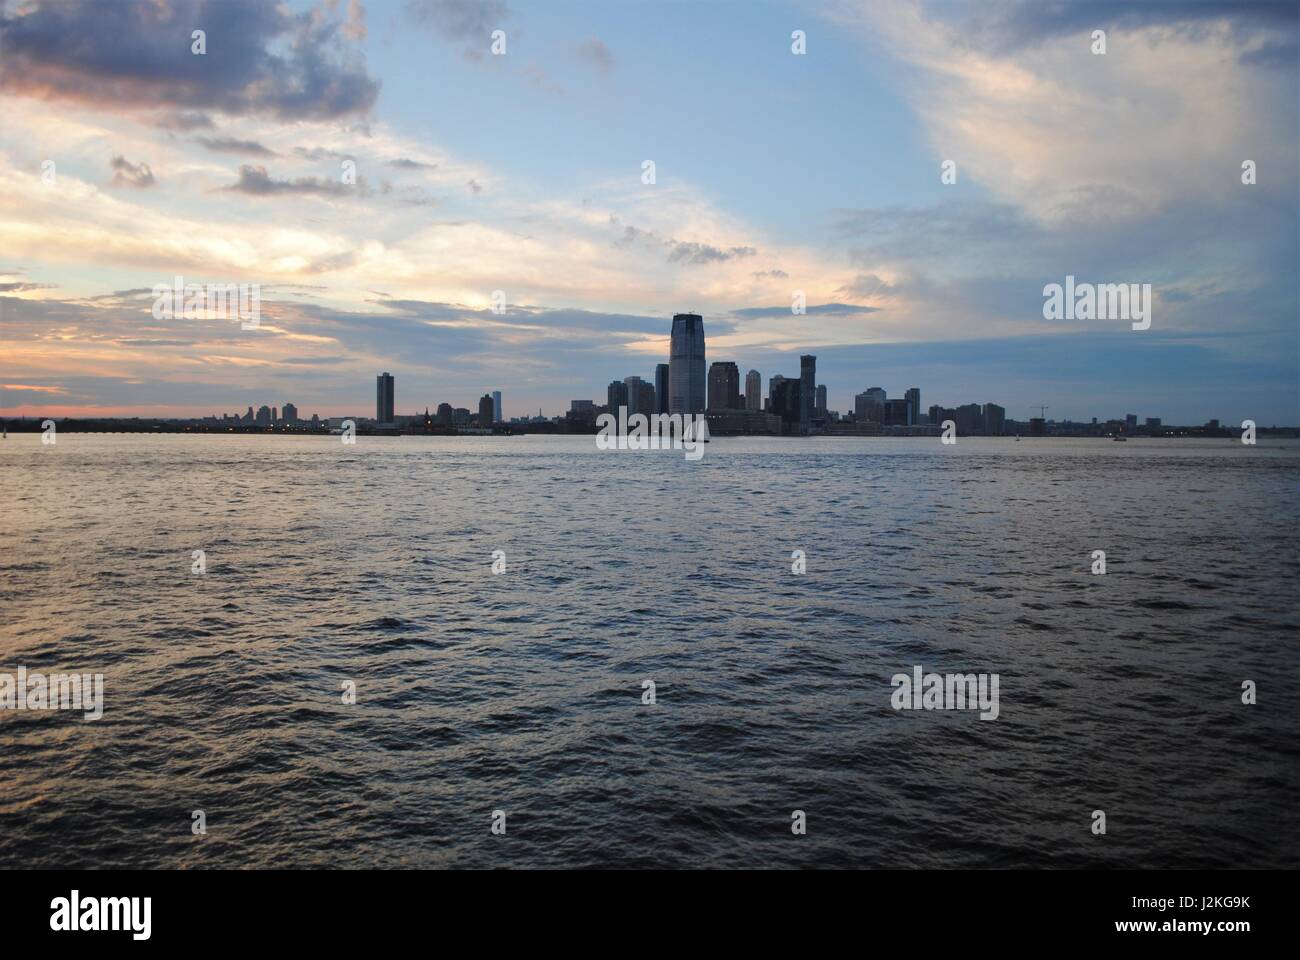 A  sailboat passing by Lower Manhattan in the Upper Bay, New York, the United States Stock Photo